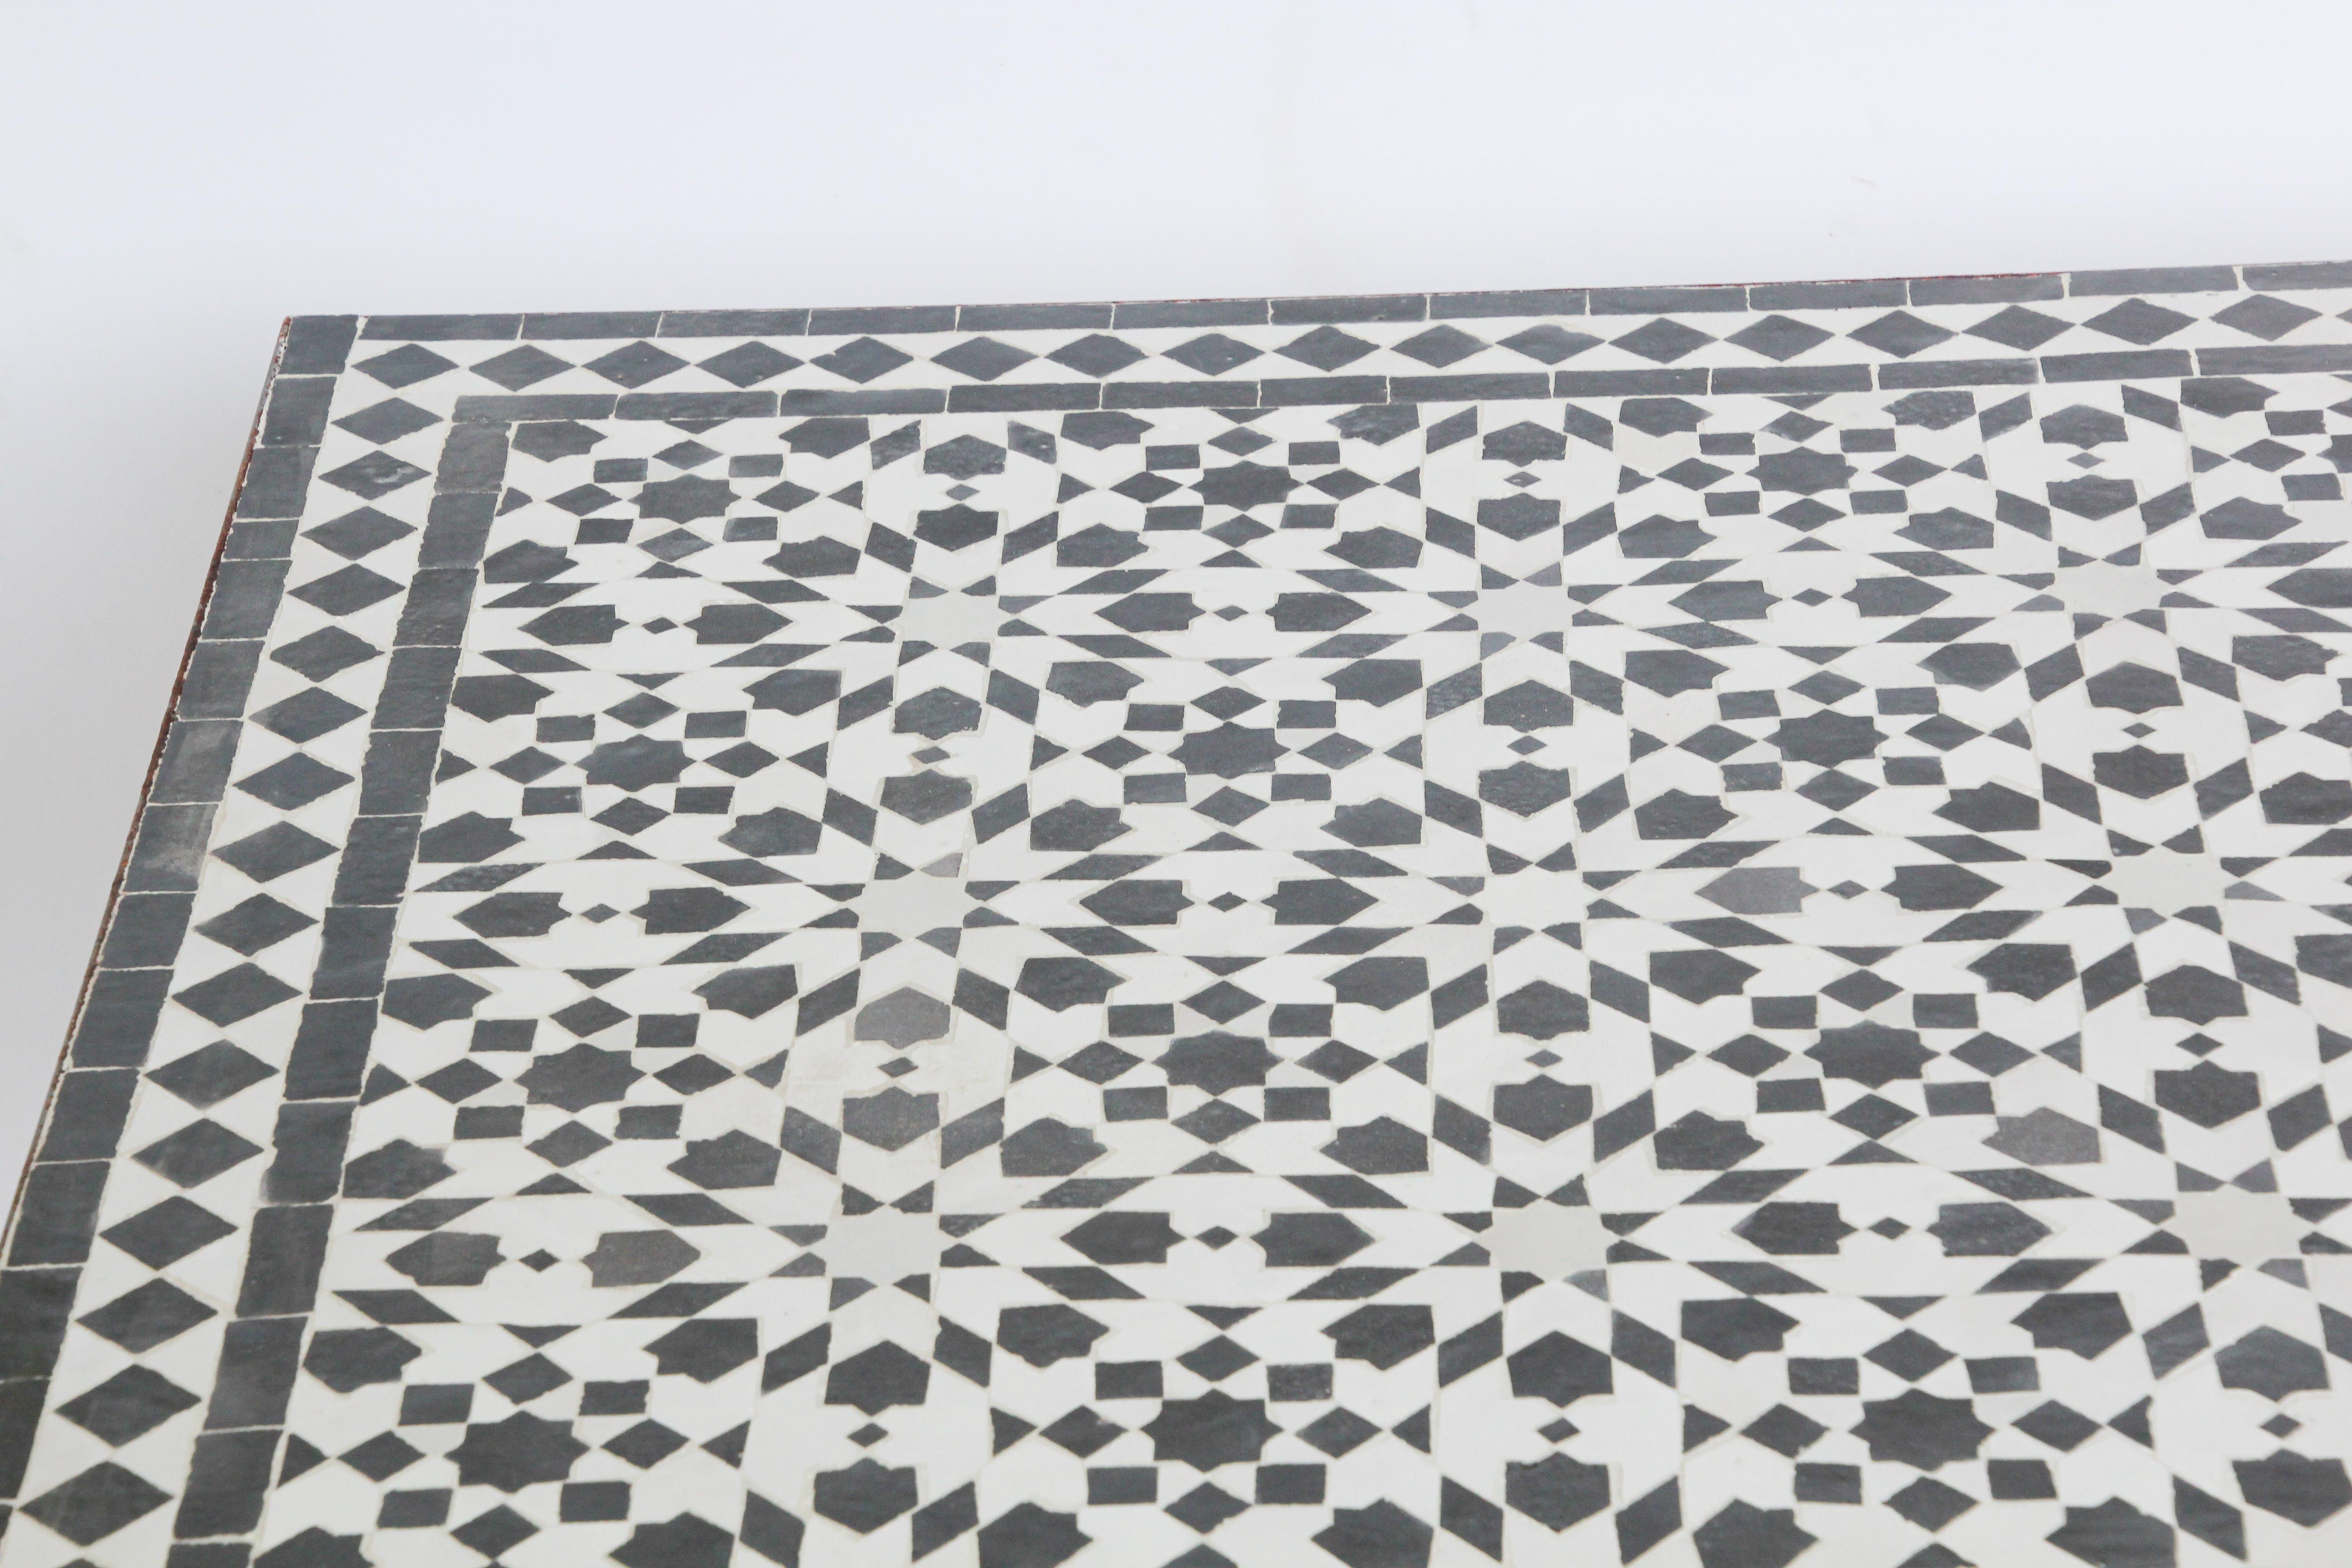 Moroccan Fez Mosaic Table in Black and White Tiles In Good Condition For Sale In North Hollywood, CA